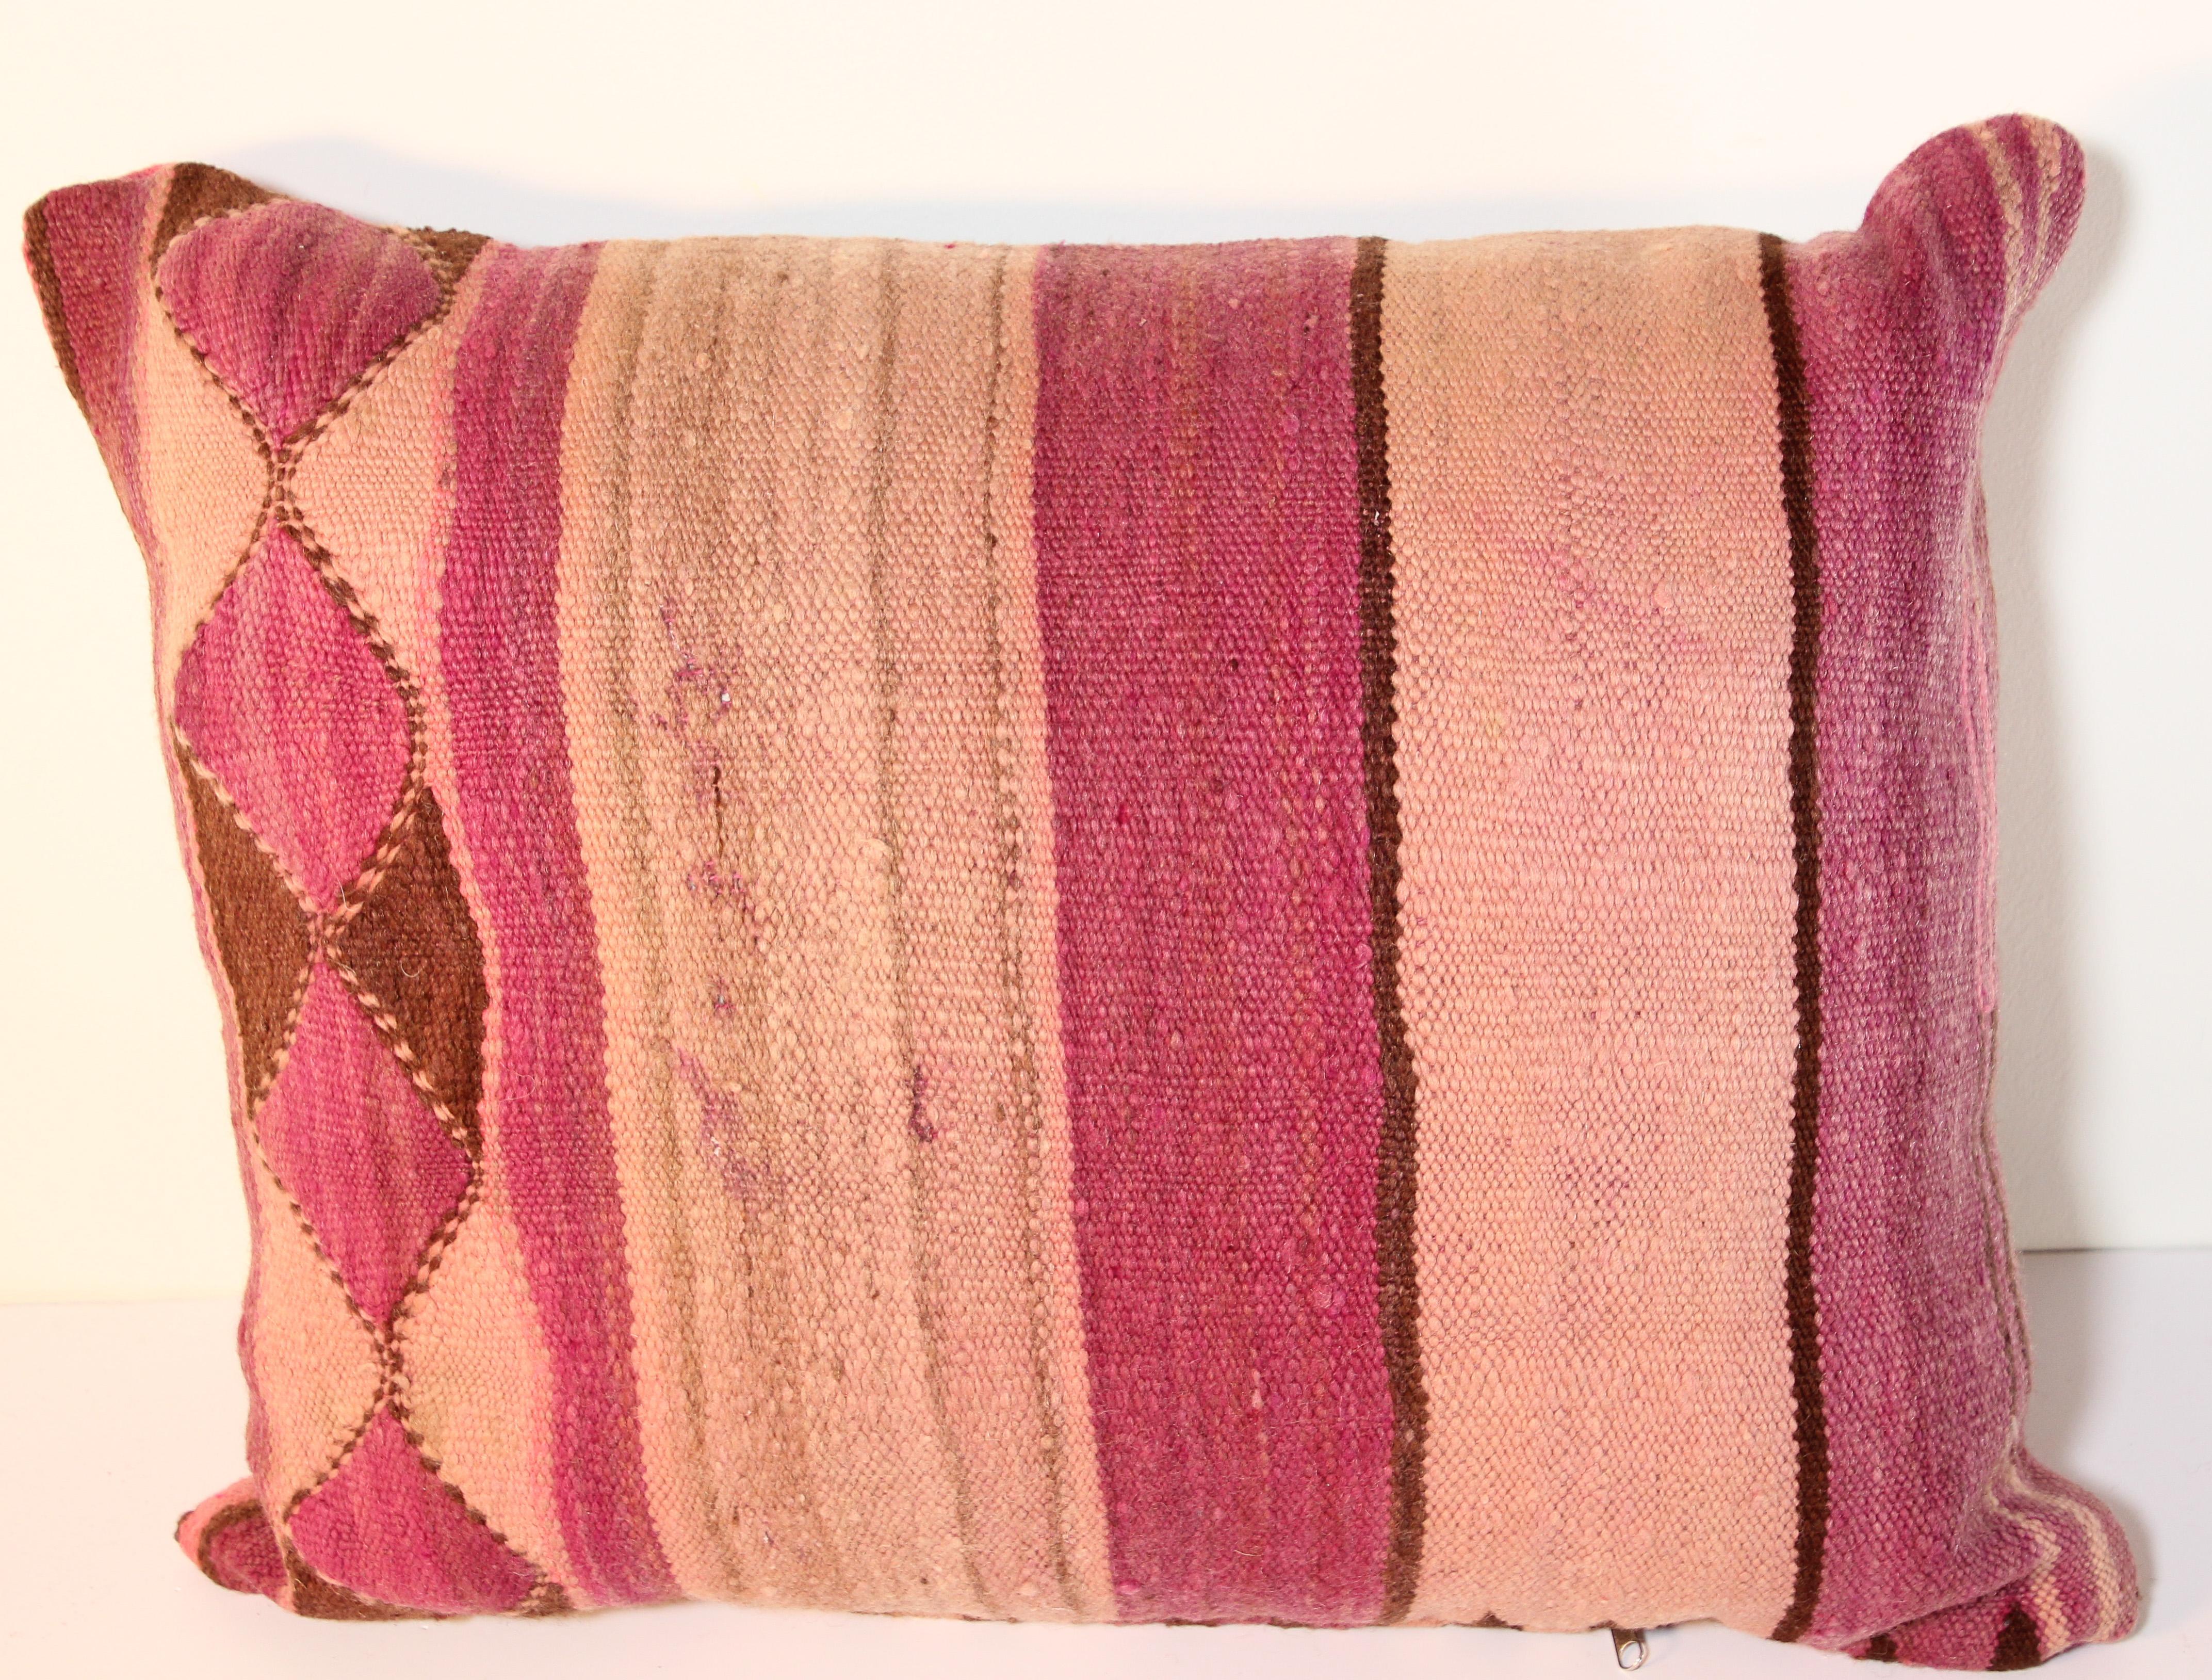 Moroccan Tribal Lumbar Pillow Cut from a Vintage Beber Stripes Rug 10